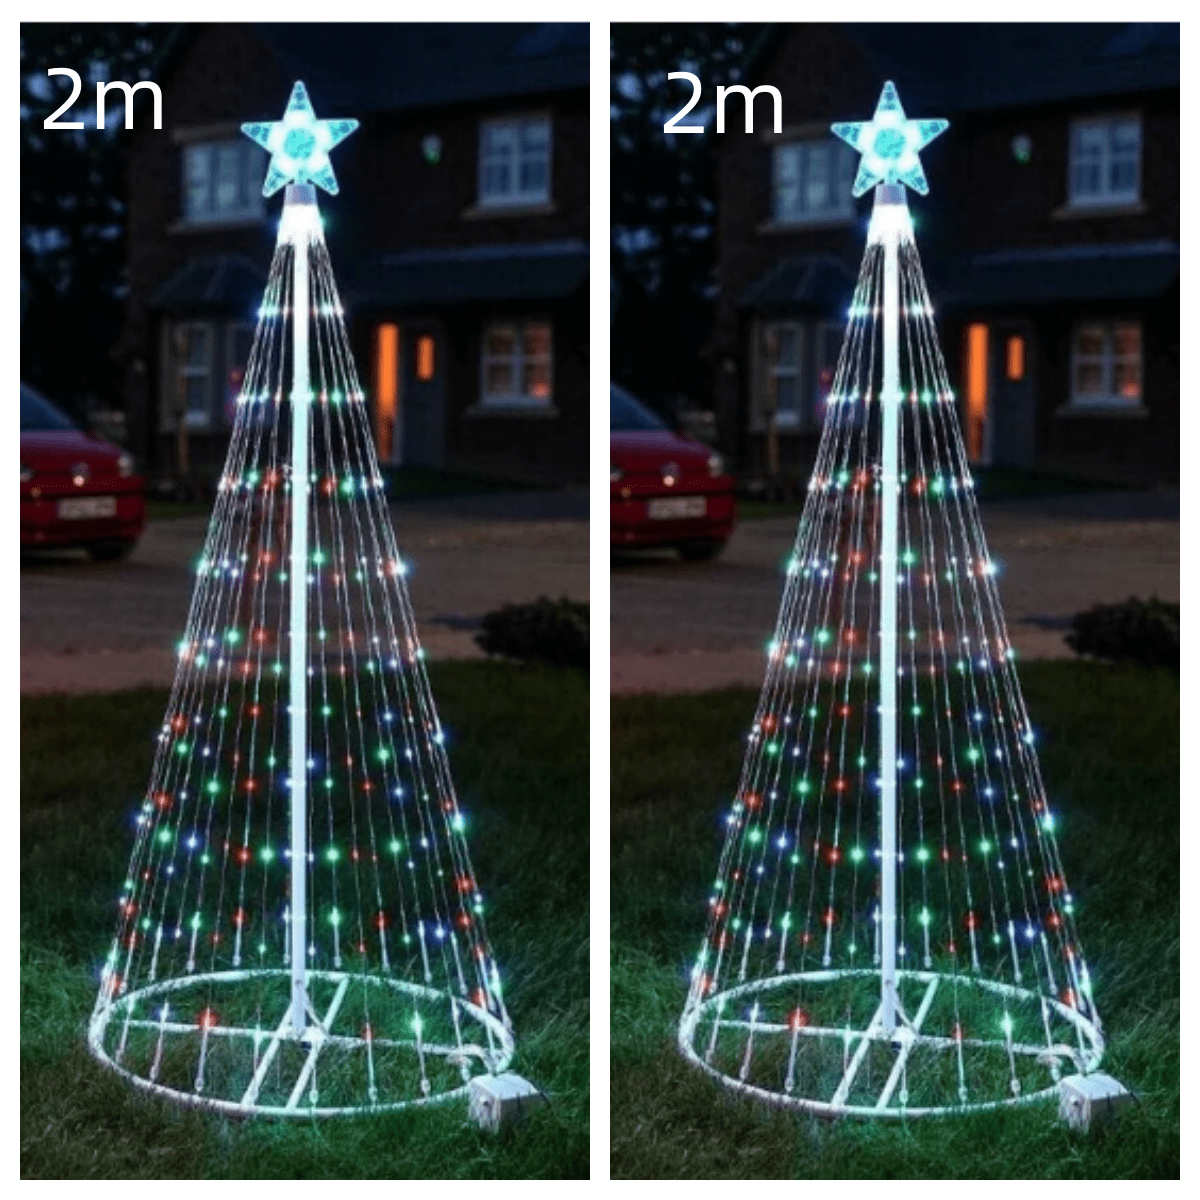 Premium Multi Color LED Animated Outdoor Christmas Tree Lights Christmas Lights Christmas Garden Countryard Decorations - Christmas LED Lights from Empire of LaTz - Only £64.99! Explore at Empire of LaTz